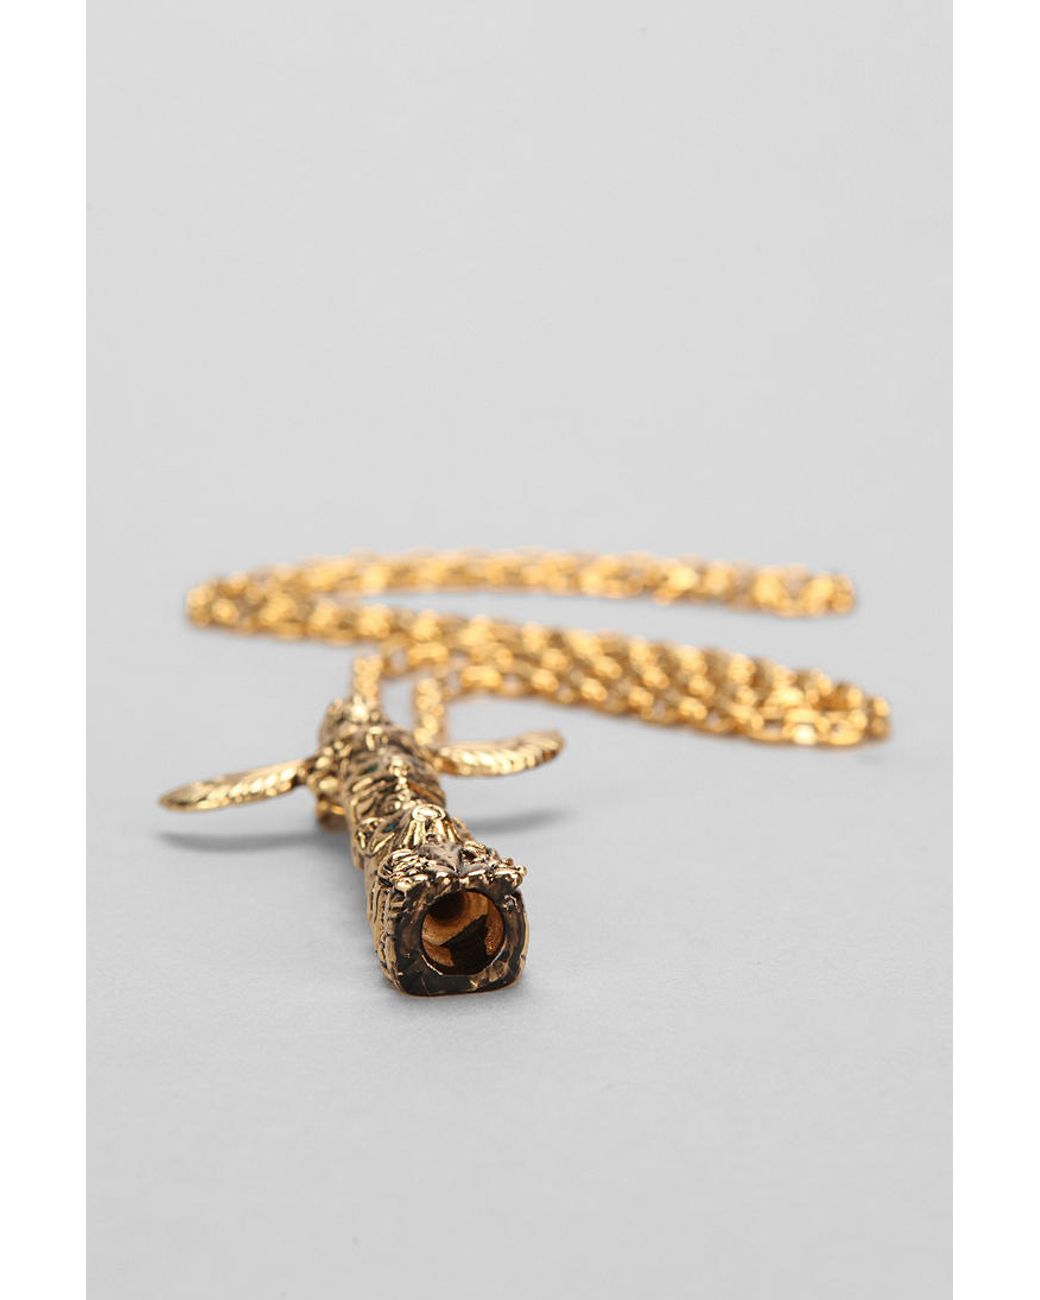 Urban Outfitters Han Cholo Peace Necklace in Gold (Metallic) | Lyst